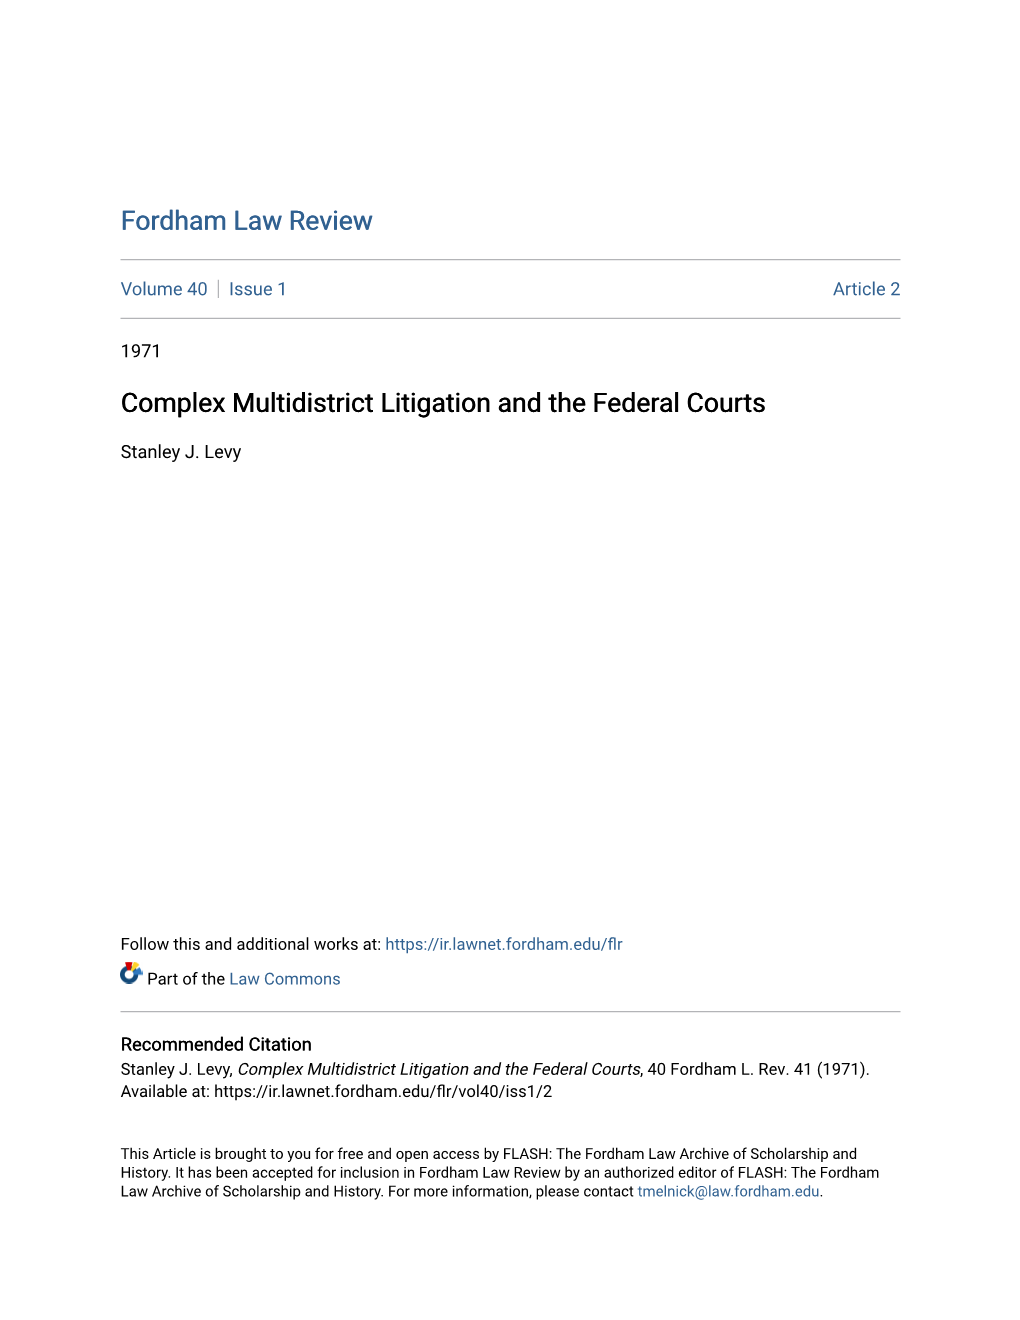 Complex Multidistrict Litigation and the Federal Courts